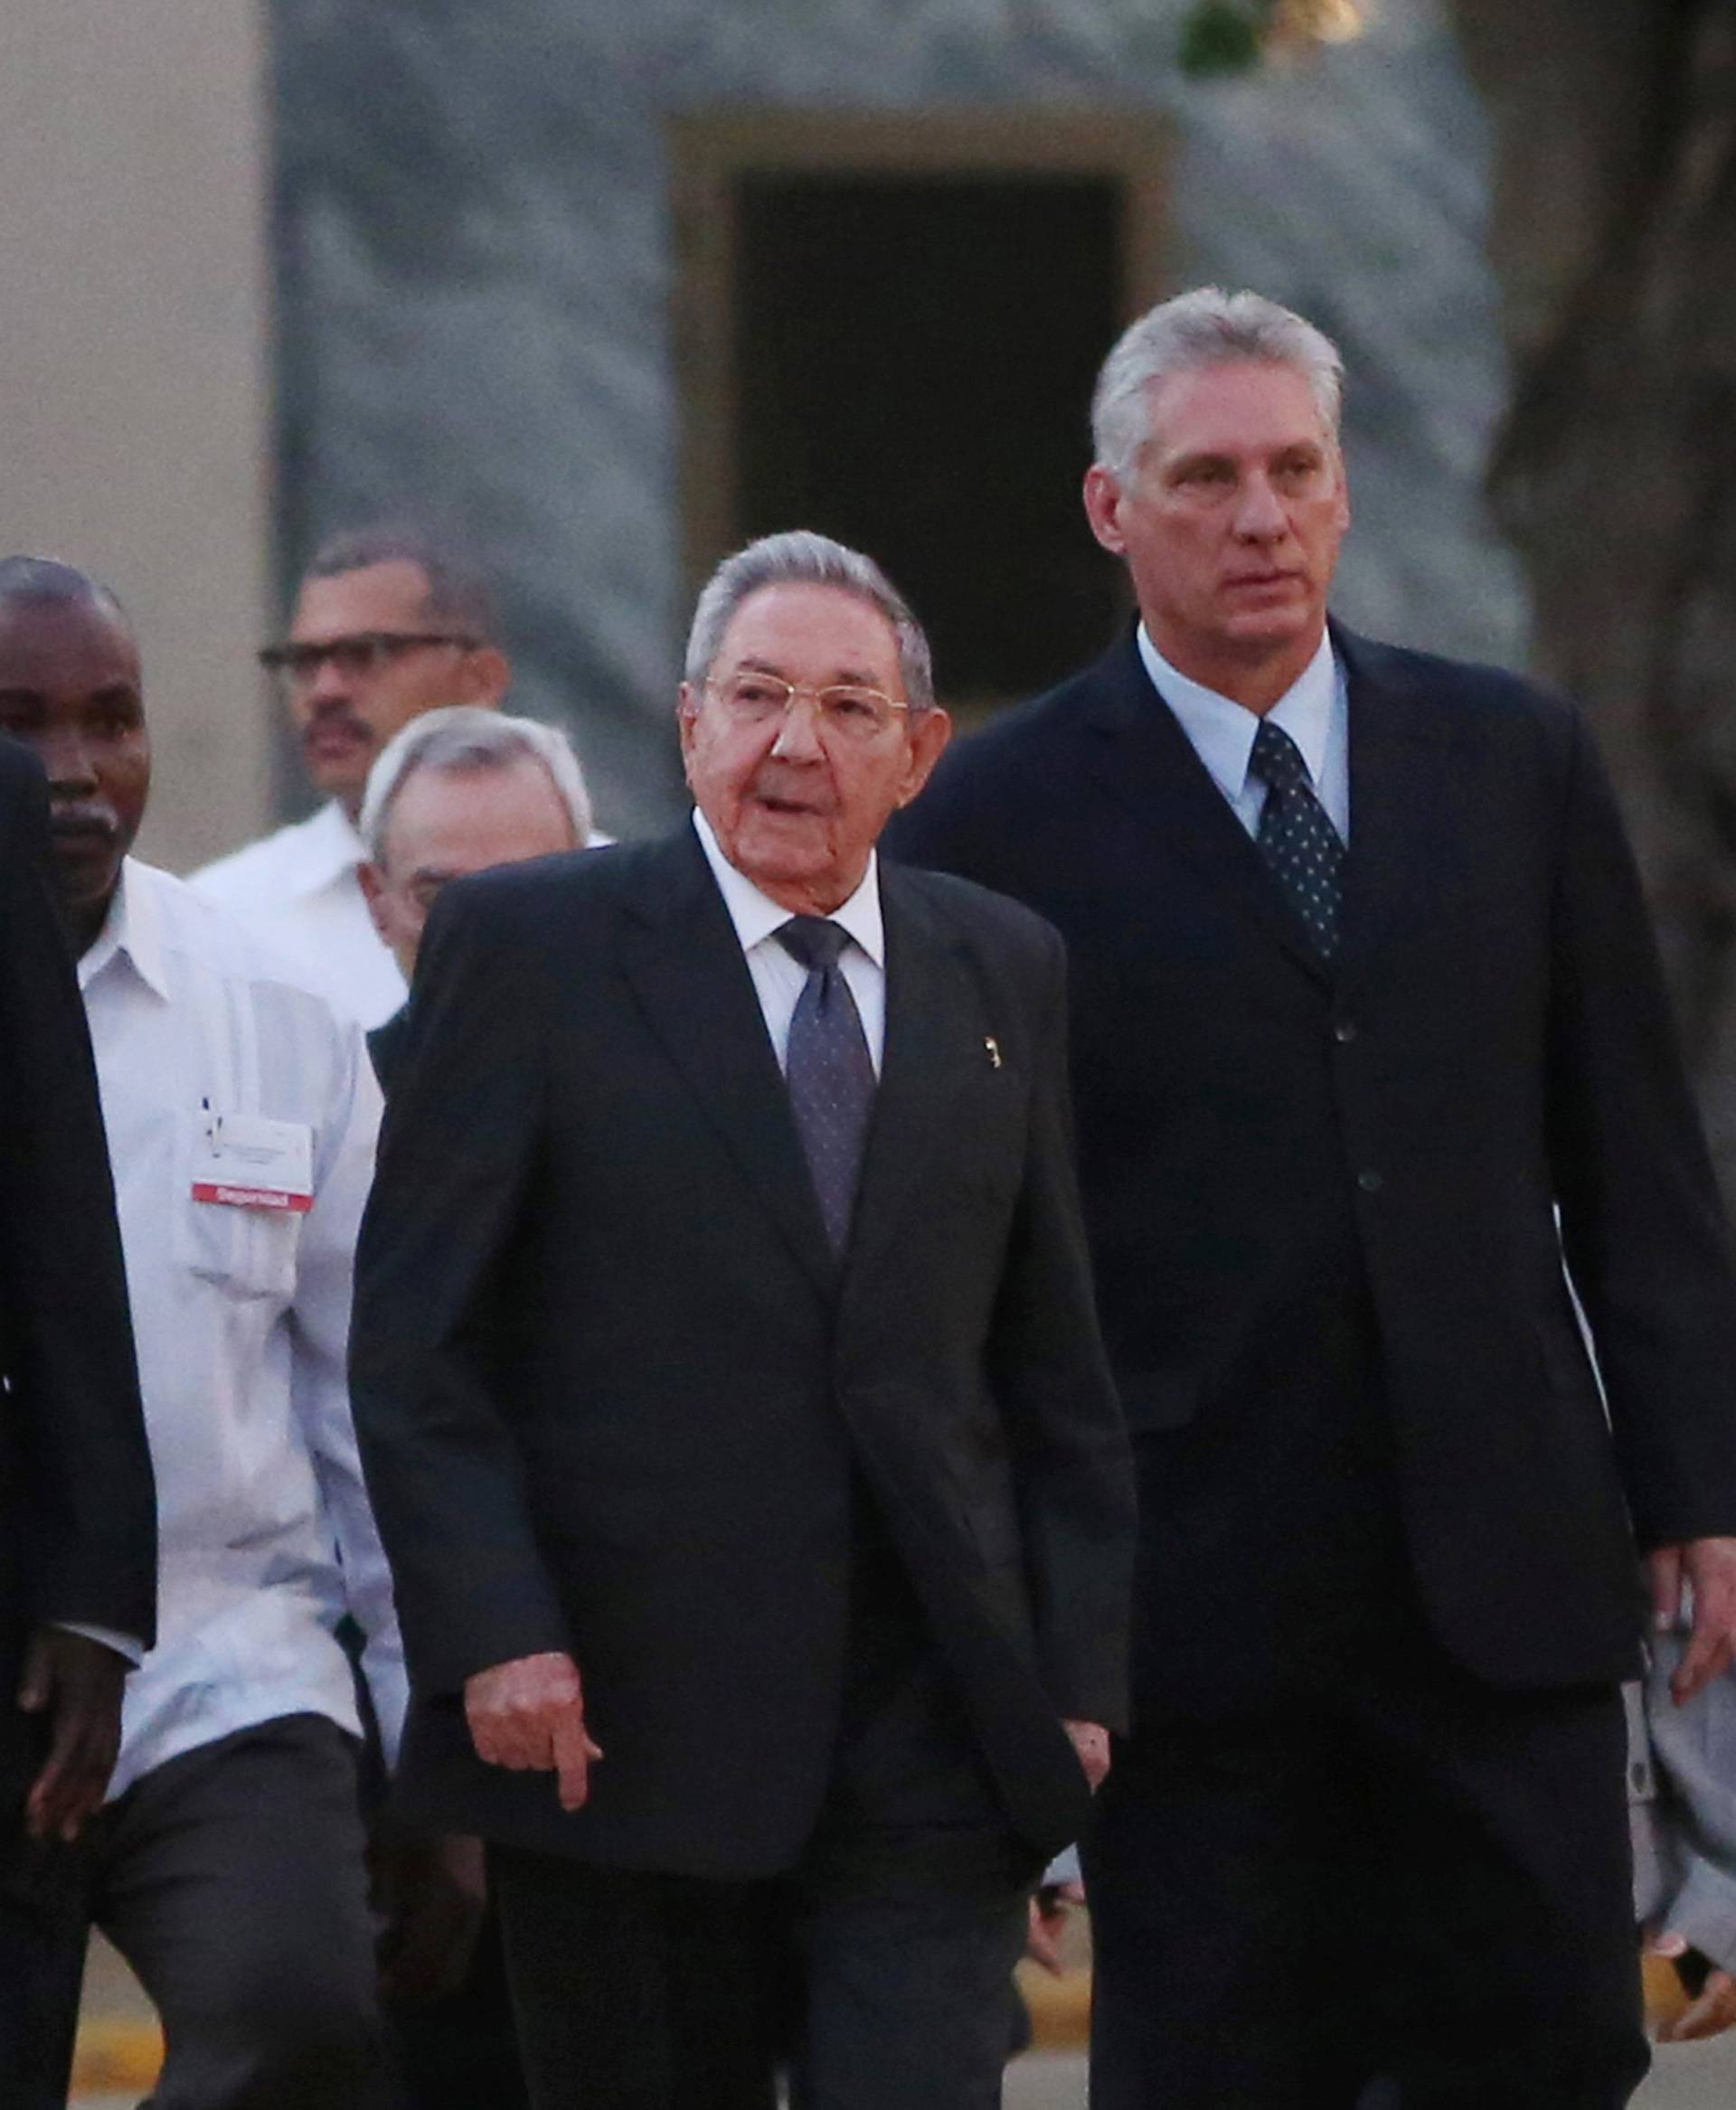 Cuba's President Raul Castro arrives for a ceremony to inaugurate a replica of New York's statue of Cuba's independence hero Marti in Havana